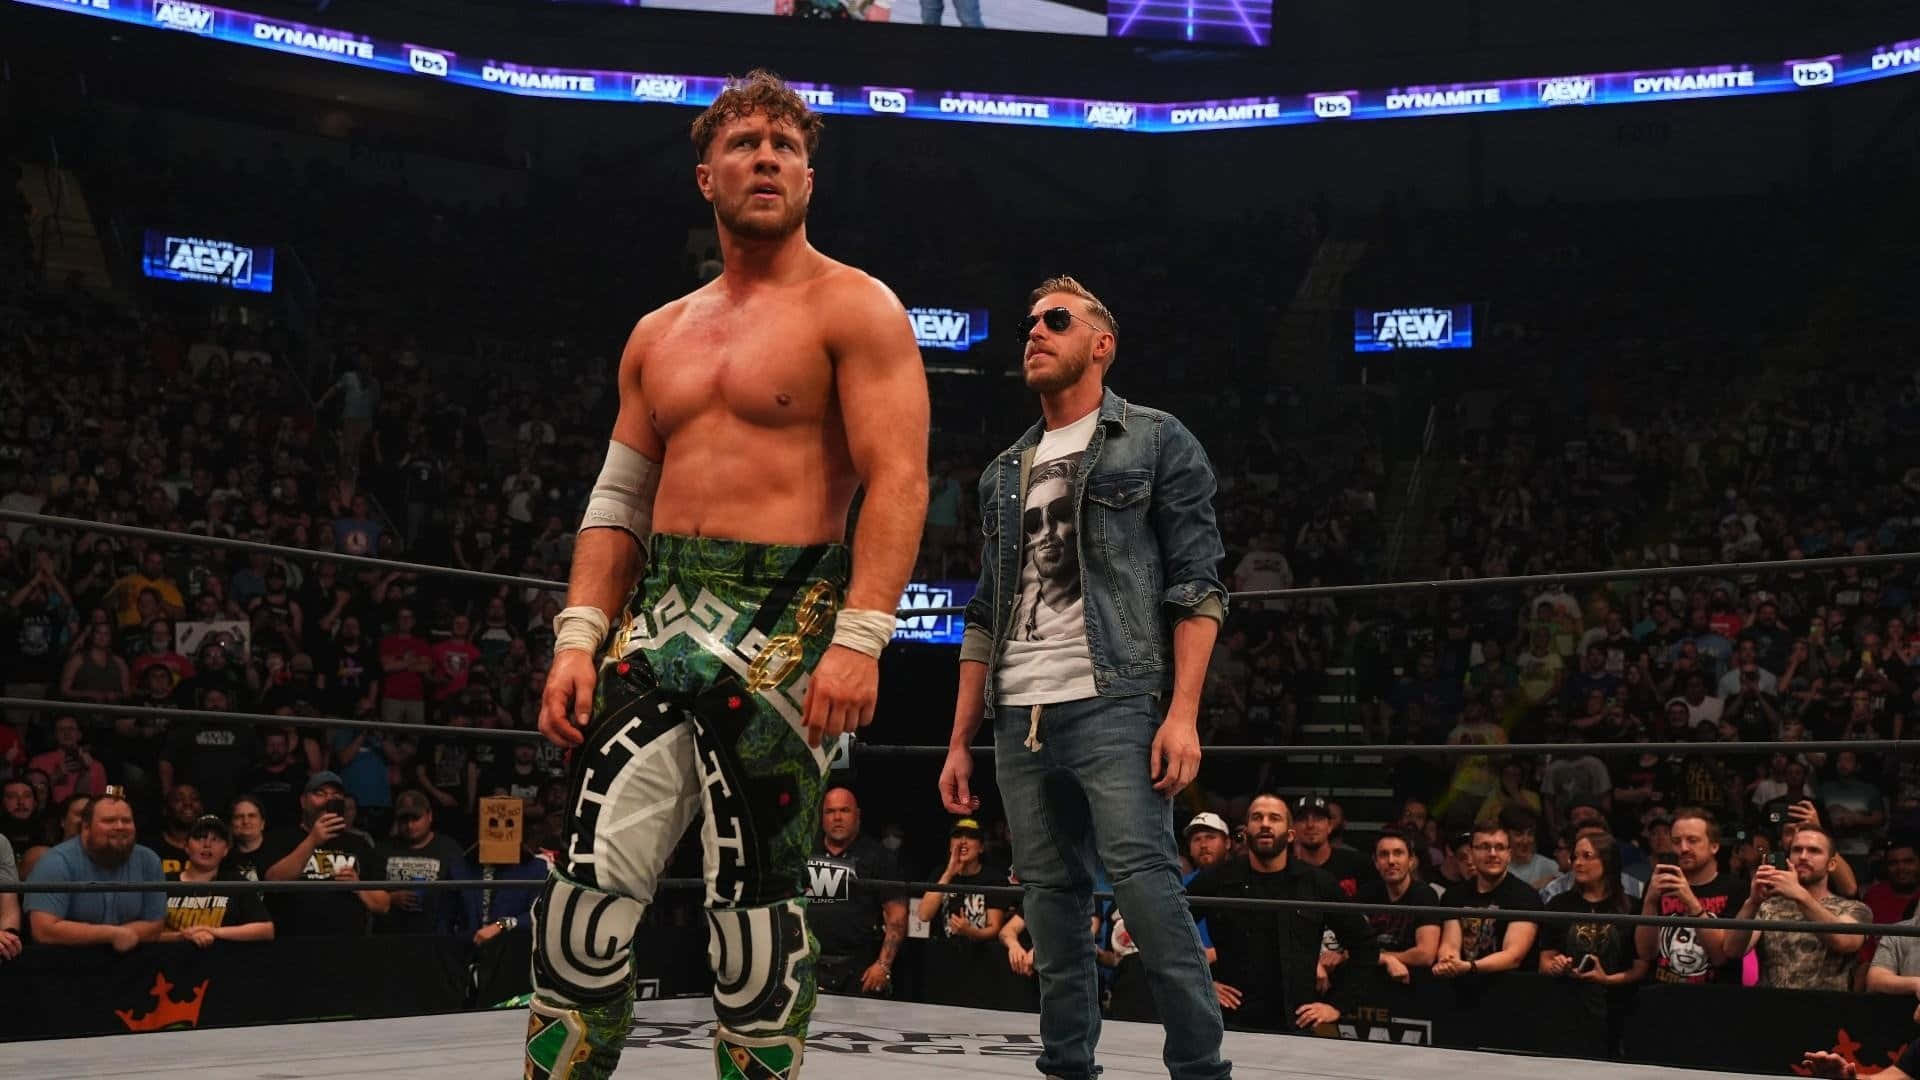 Will Ospreay & Orange Cassidy Picture